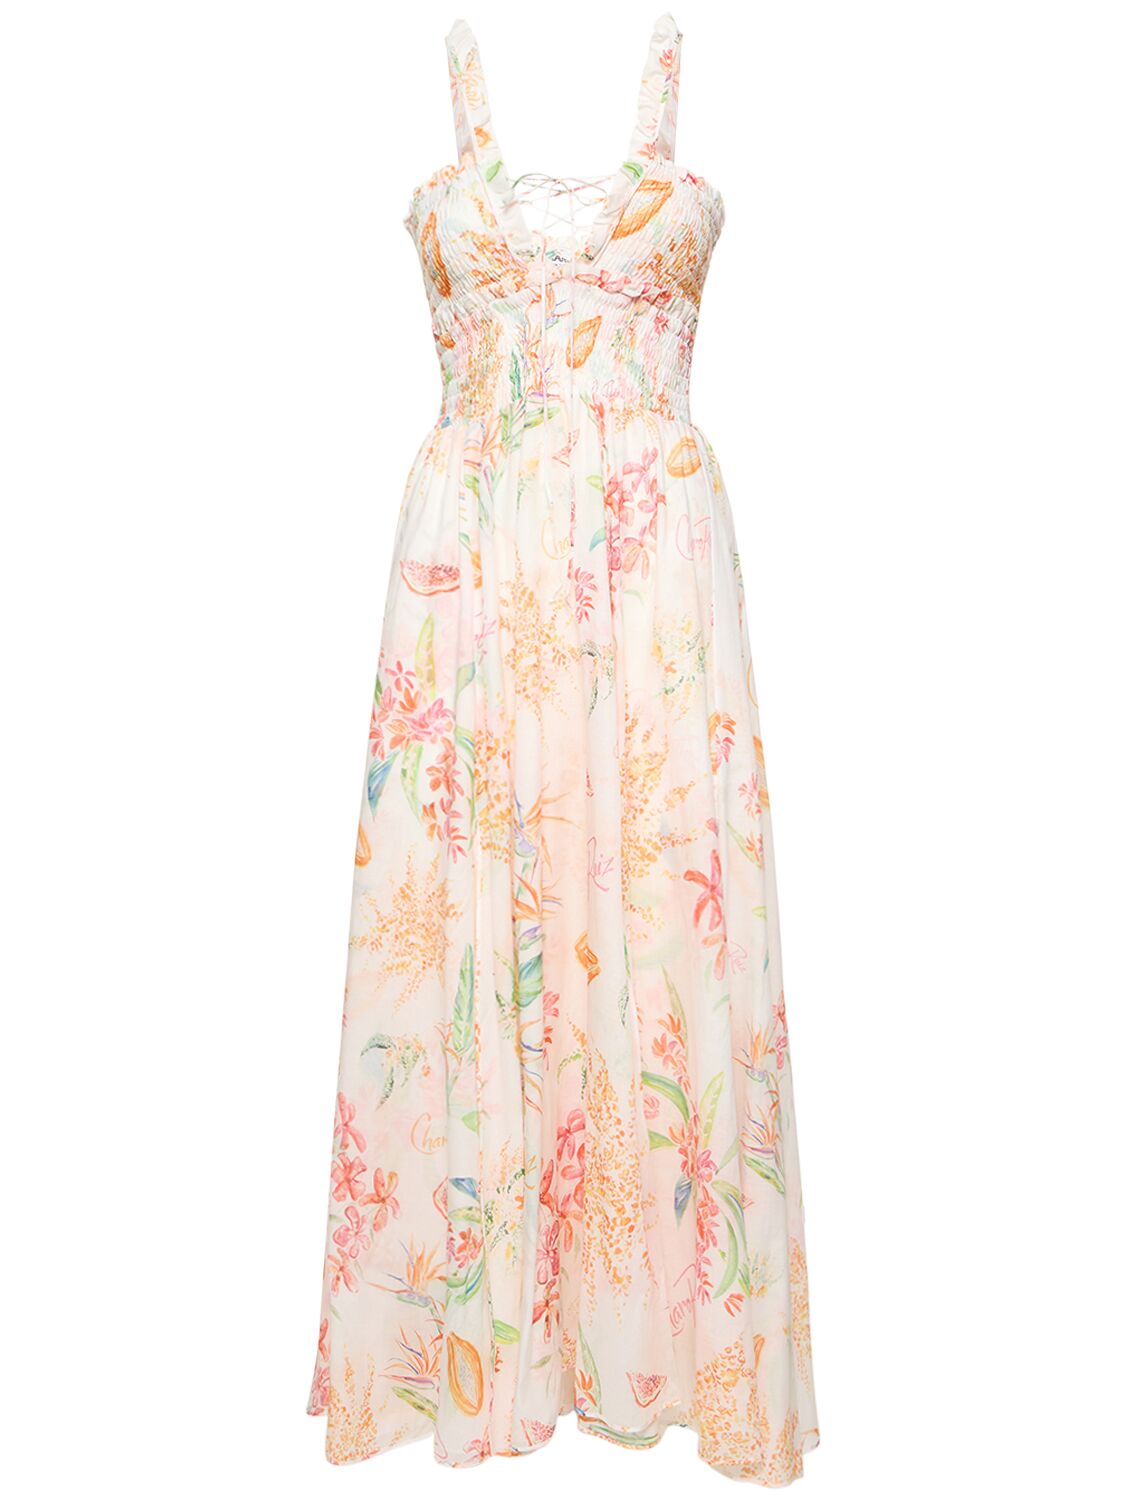 Image of Floral Printed Cotton Maxi Dress